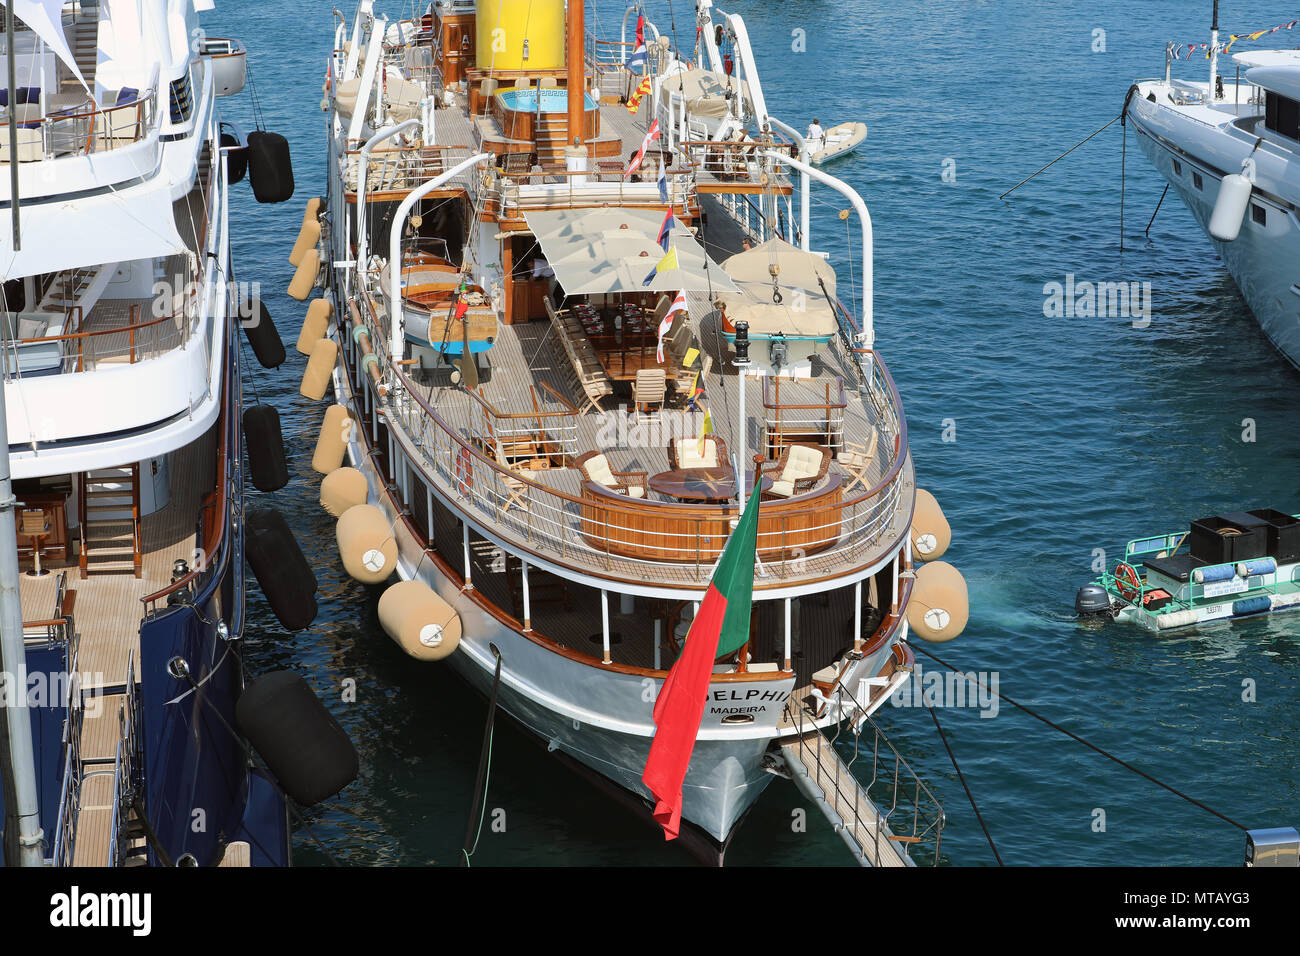 Monte-Carlo; Monaco - May 24; 2018: Rear View of a Vintage Luxury Sailboat In The Monte-Carlo Harbour (Port Hercule). Principality of Monaco, French R Stock Photo